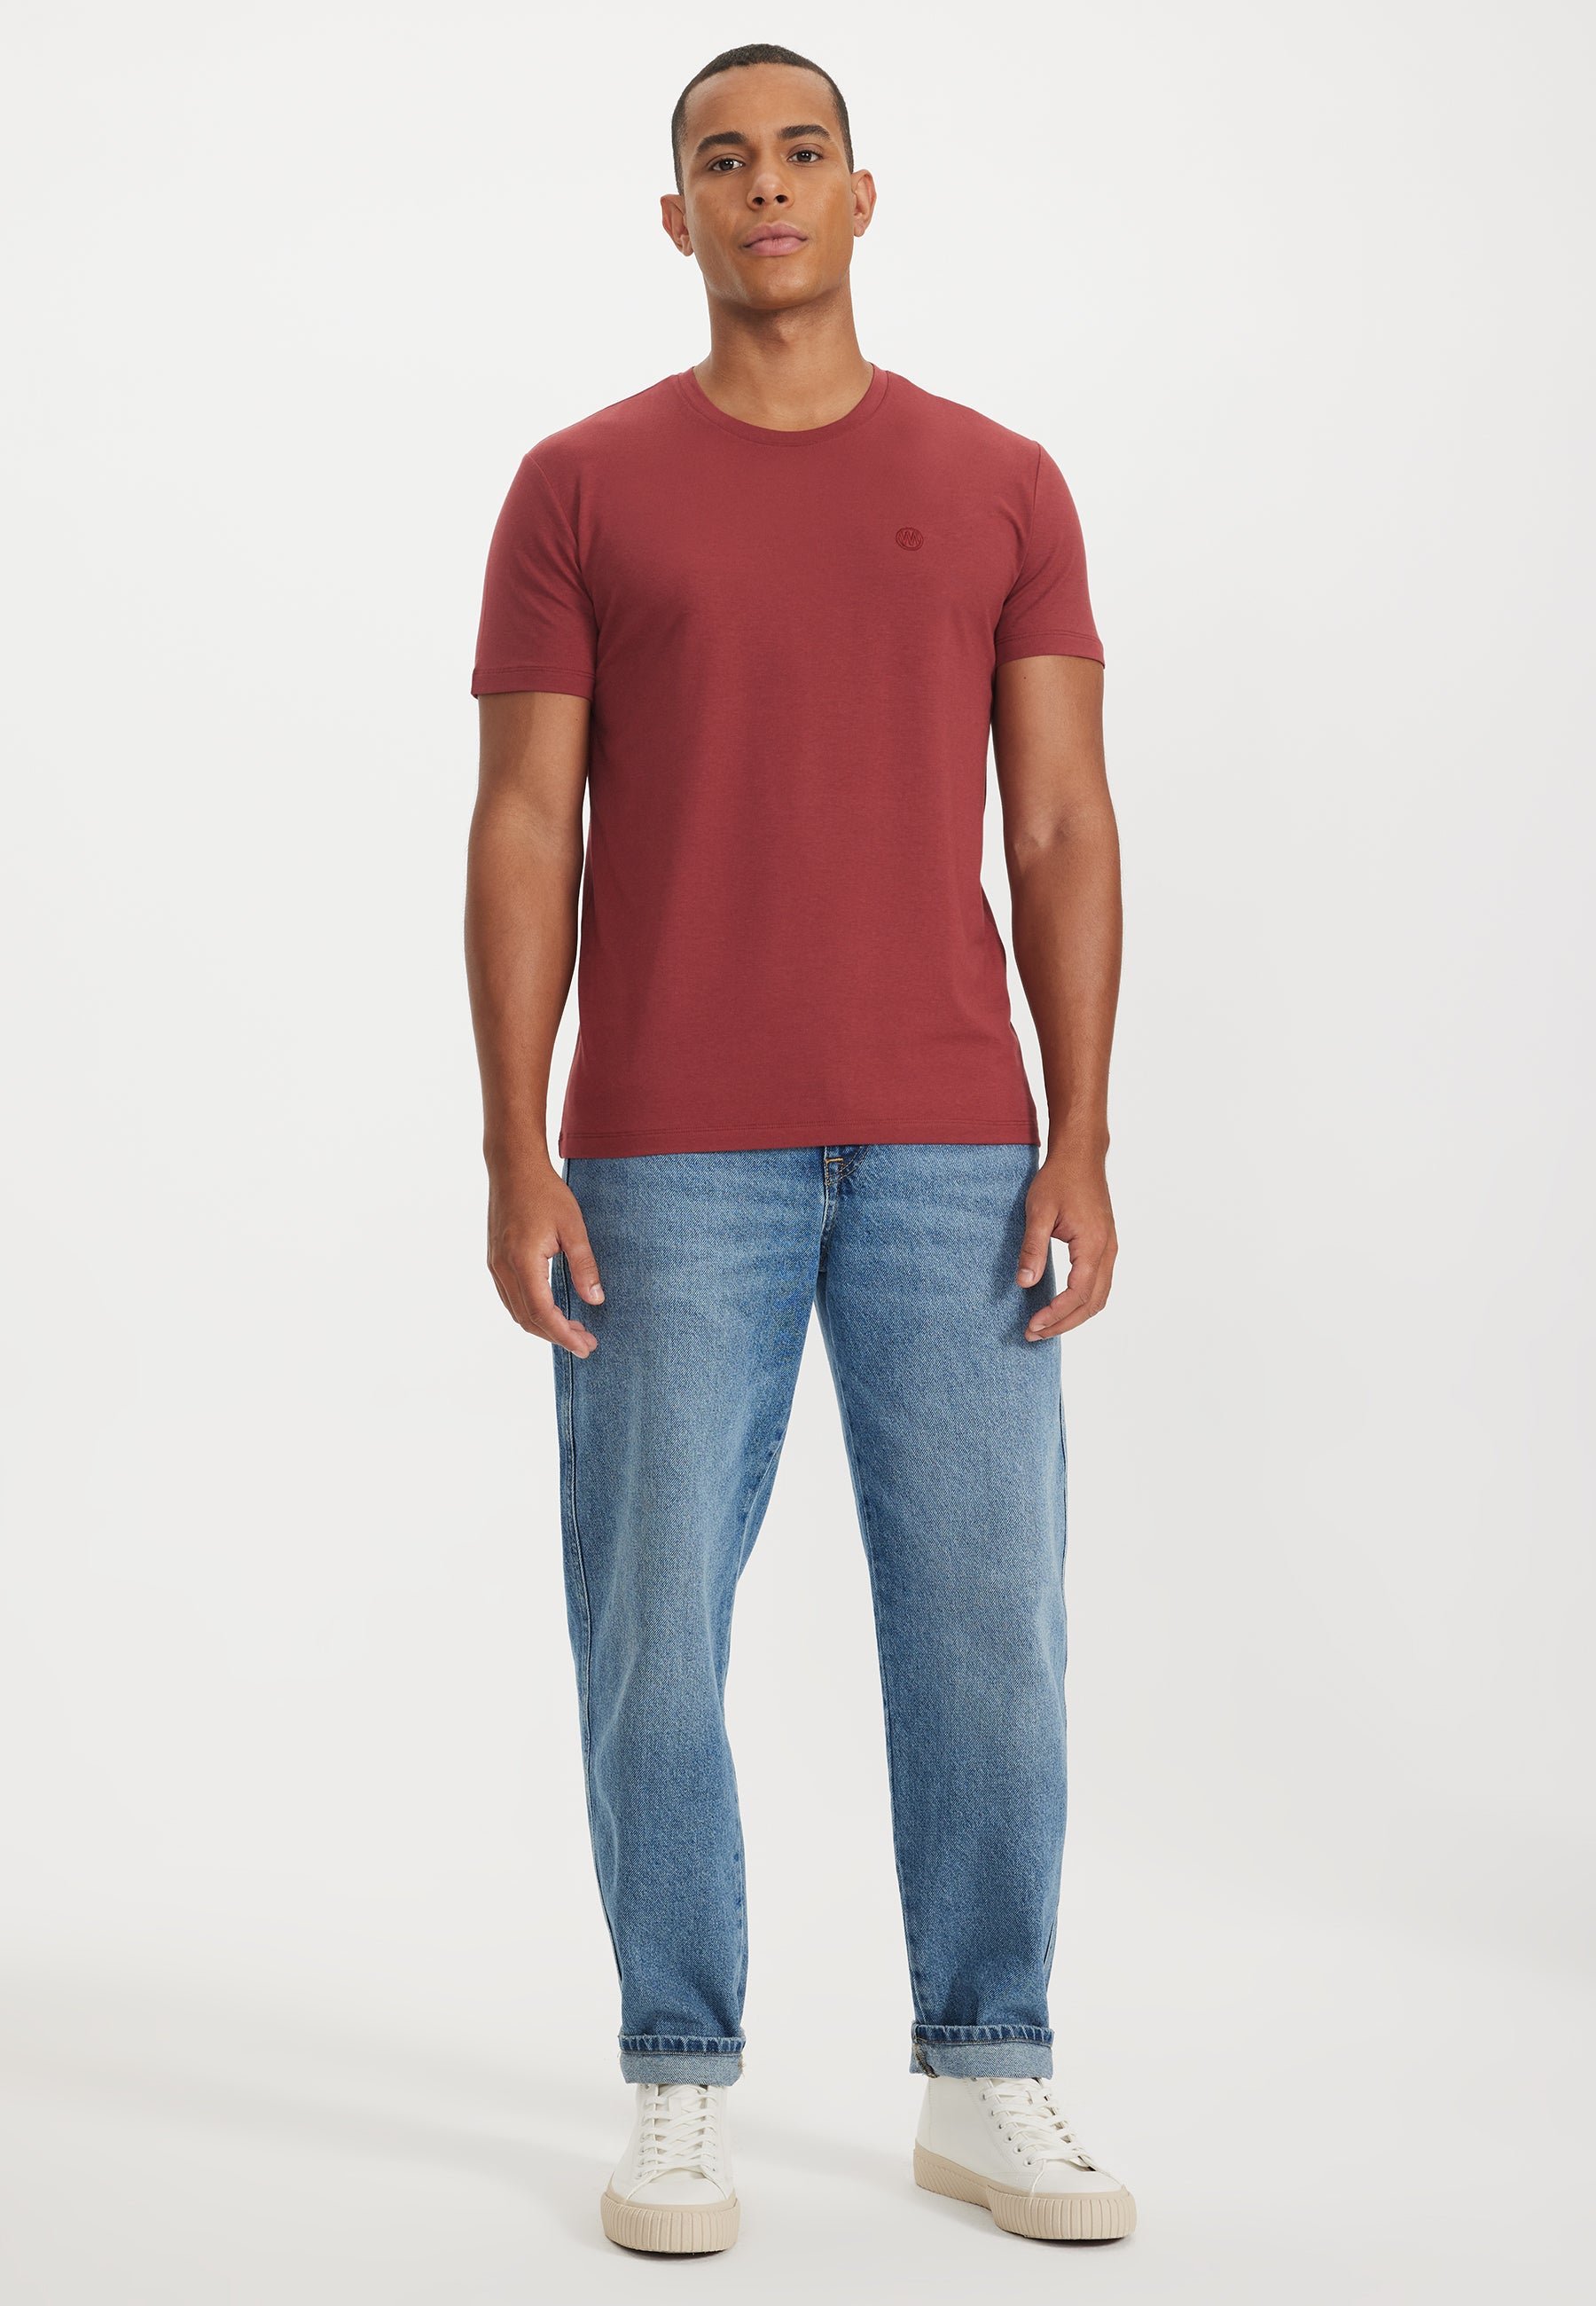 PARKER O-NECK TEE in Brick Red